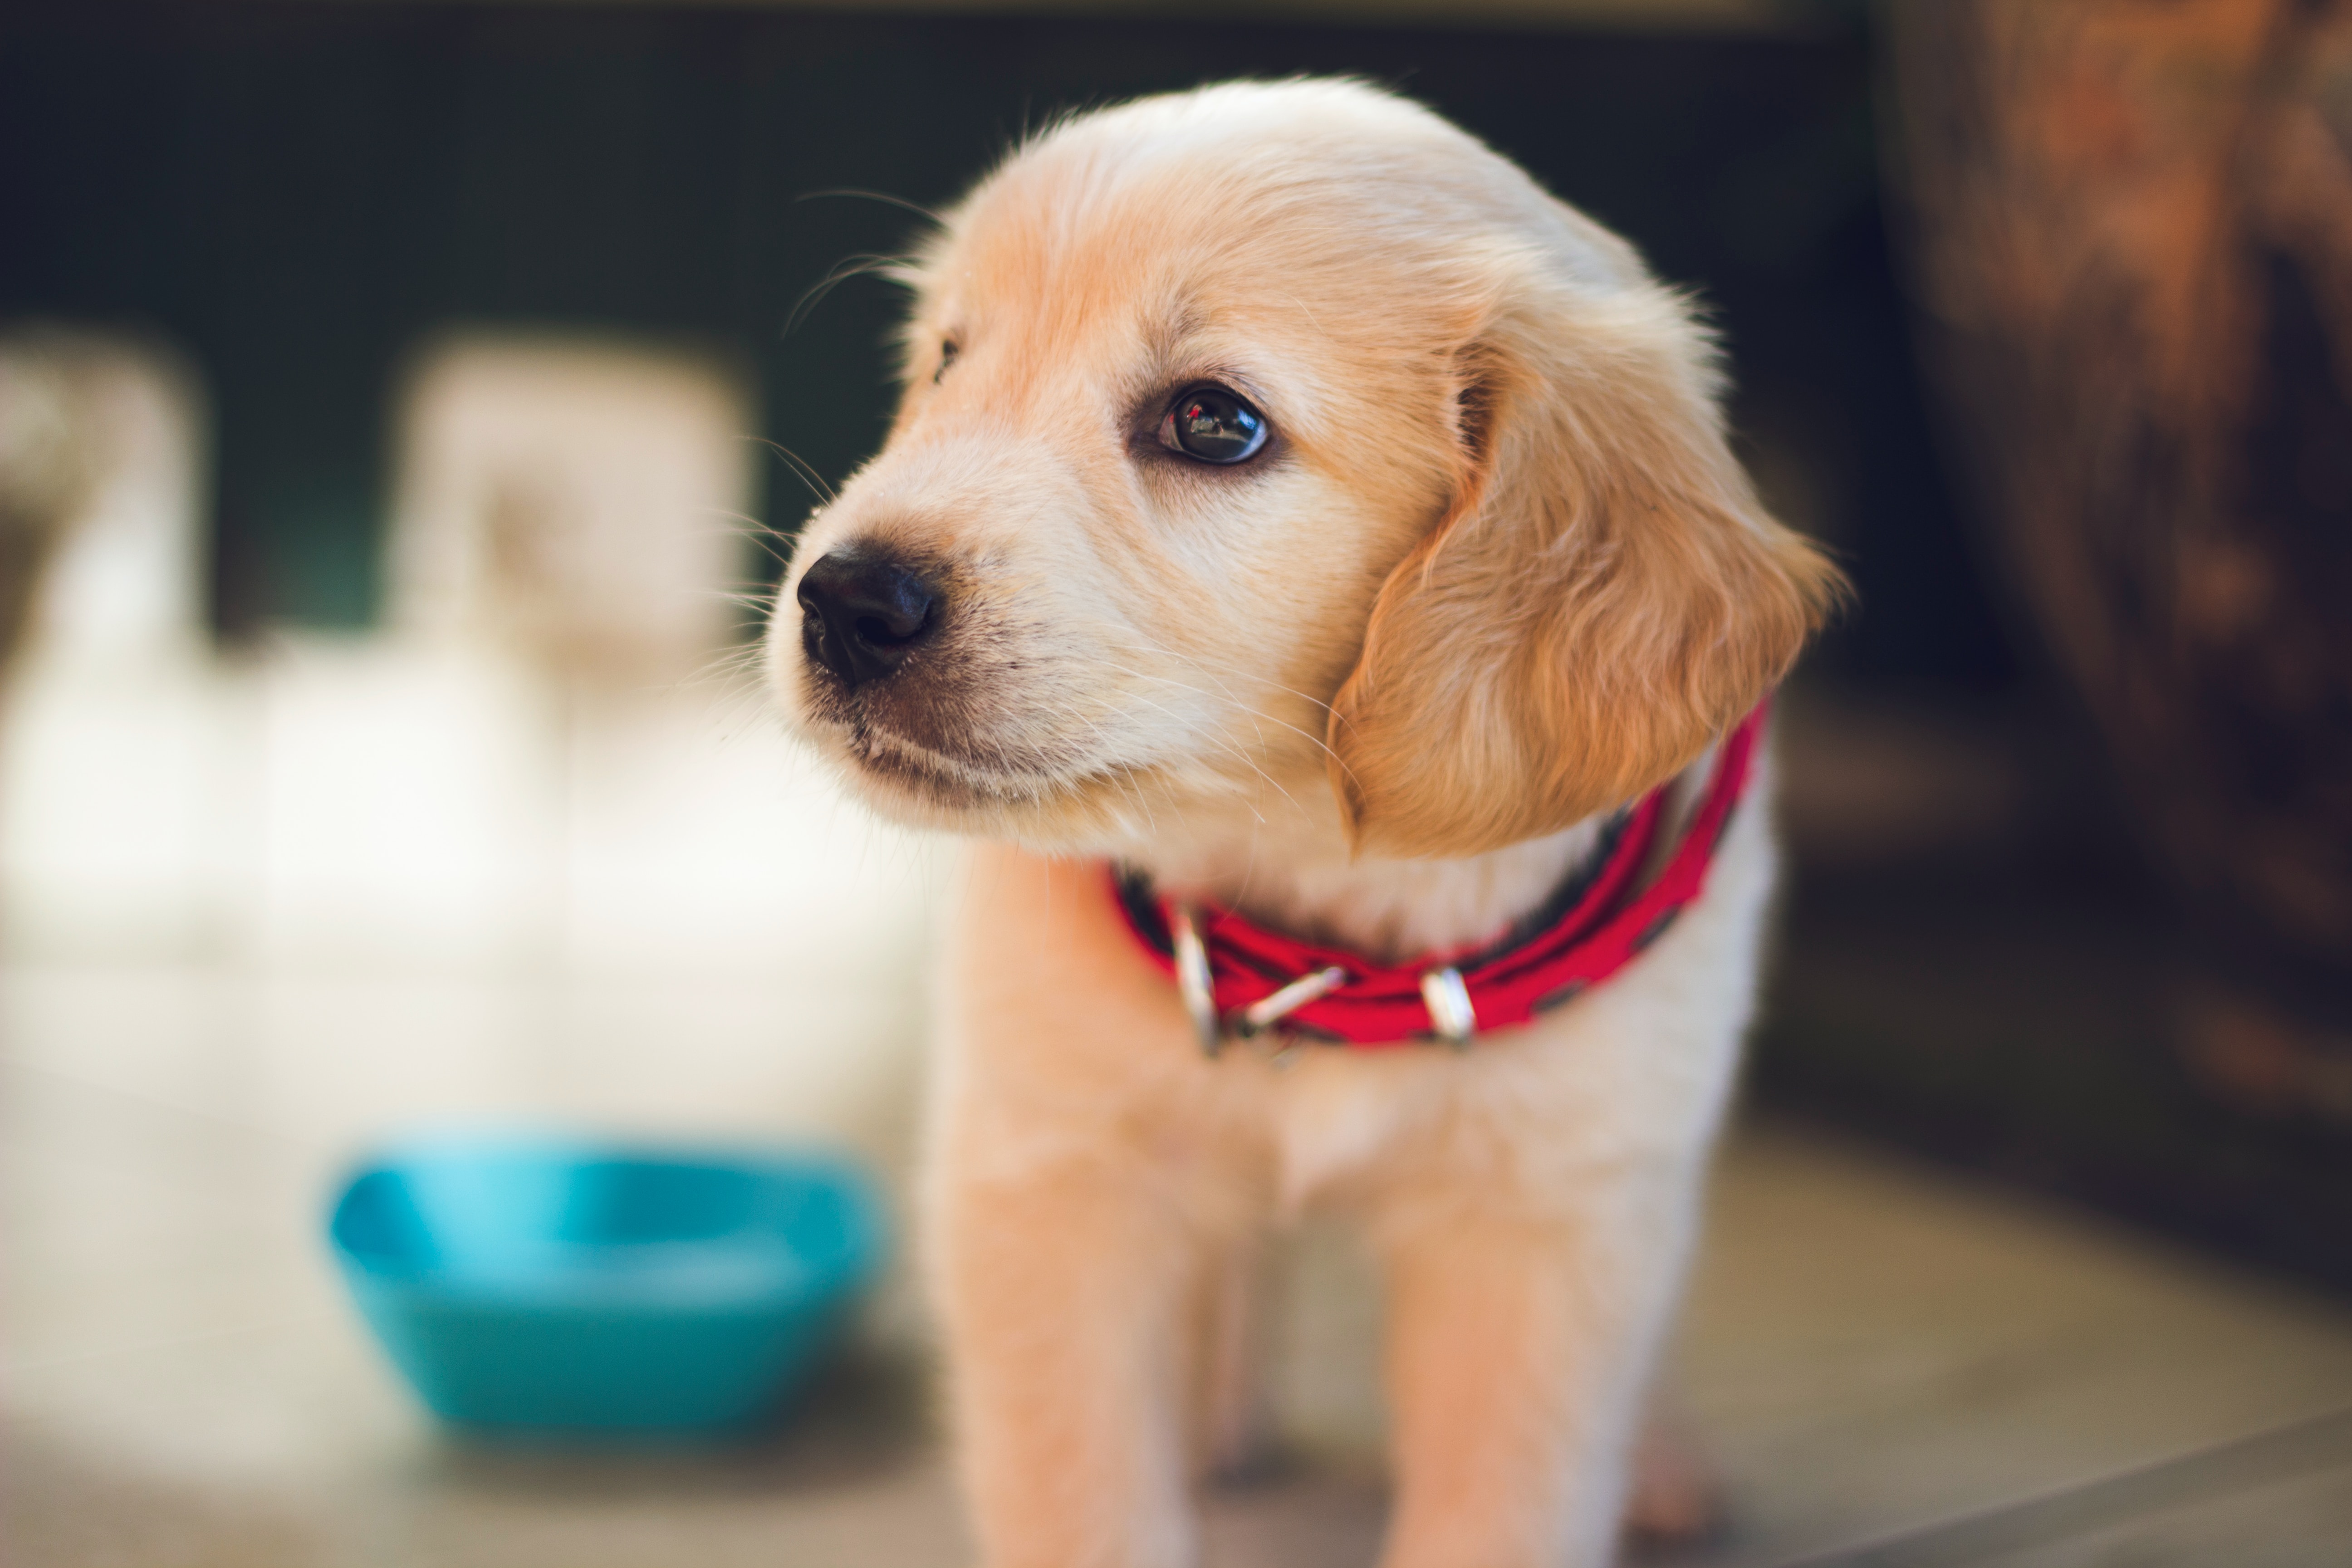 Golden Retriever puppy with red collar and blue food bowl behind them